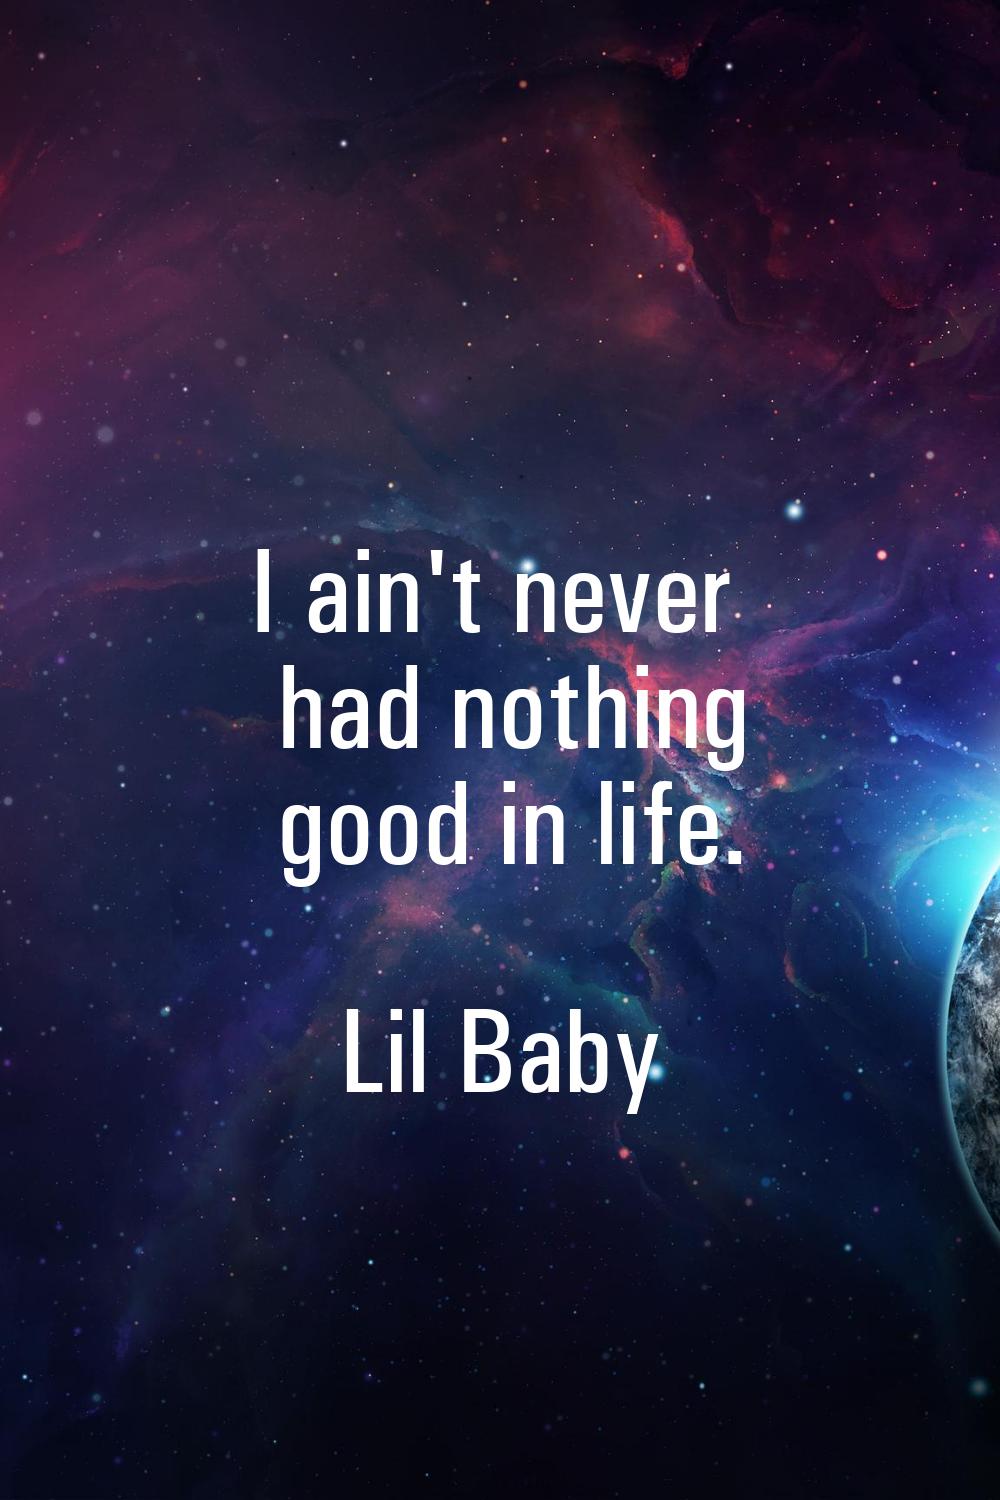 I ain't never had nothing good in life.